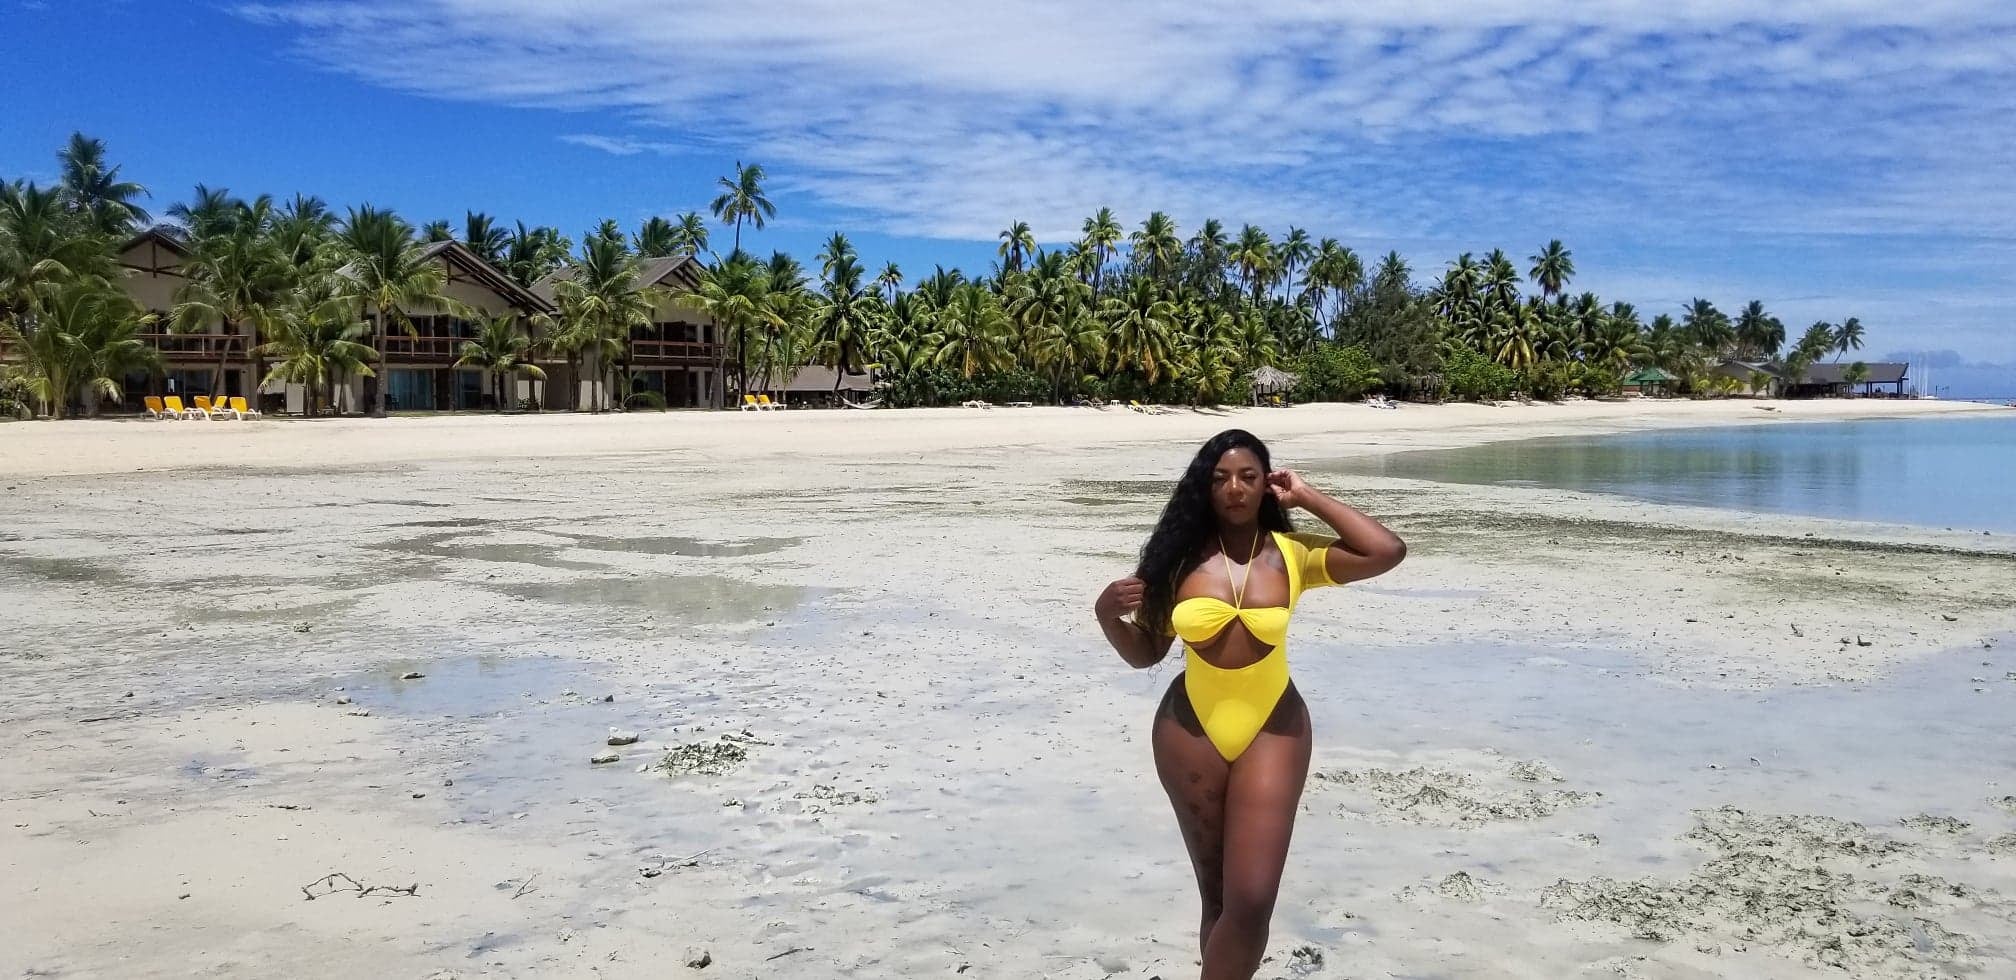 Black Travel Vibes: Unplug From It All In Fiji